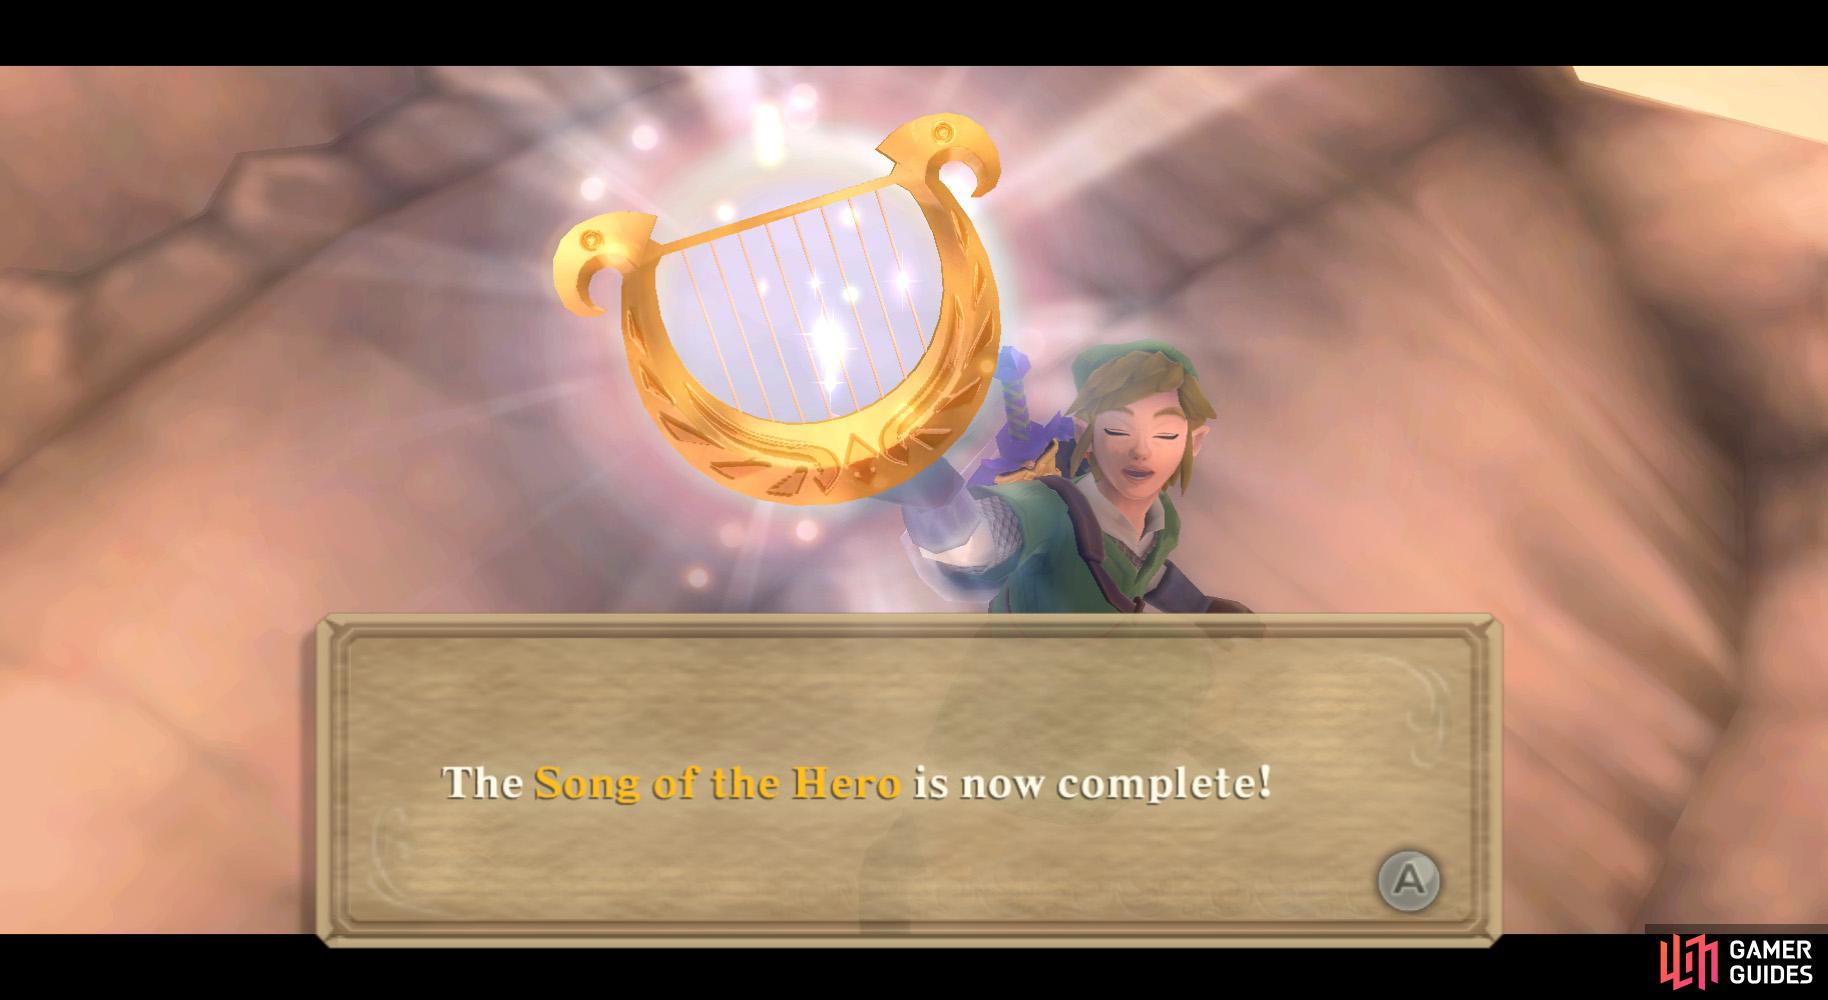 At long last, the Song of the Hero is complete!